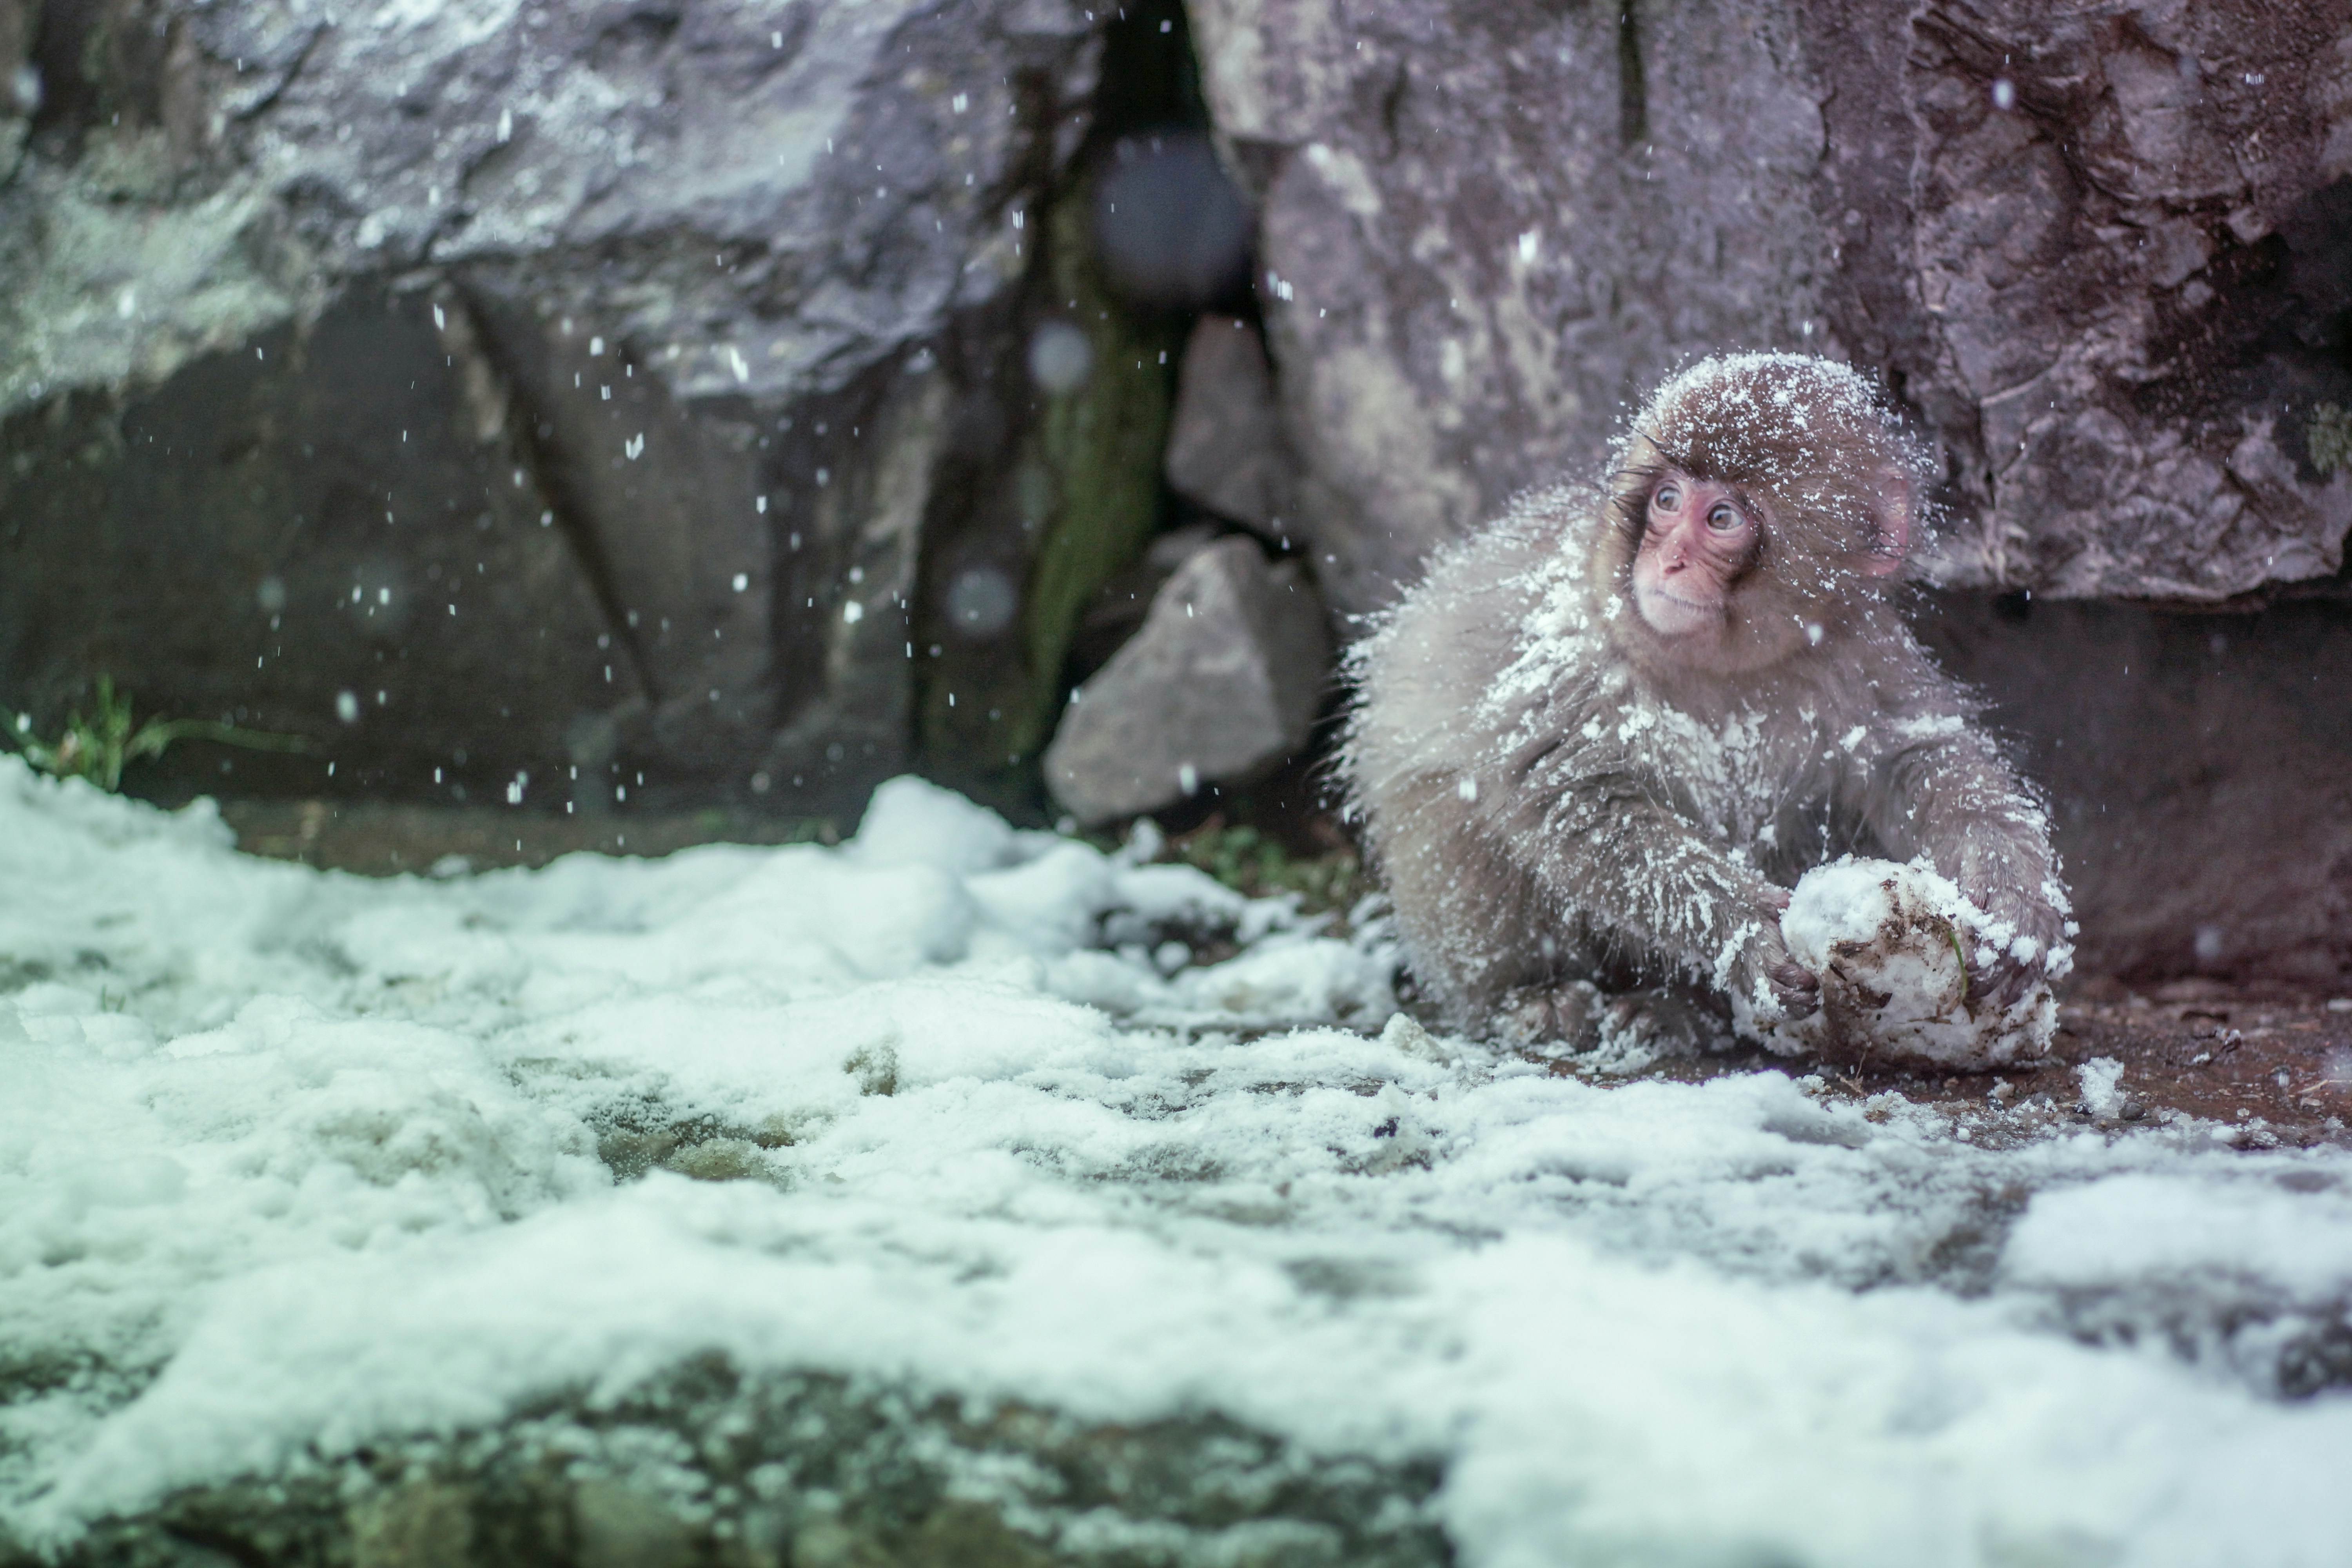 Snow Monkey Park - じごくだにやえんこうえん（地獄谷野猿公苑） The youth of the wild can be remarkably similar to the youth of man. When visiting wild monkeys in Japan you are warned not to stare into the eyes of the monkeys. What is it about the human gaze that could enrage them? Looking at their youth makes that wild reality seem distant.